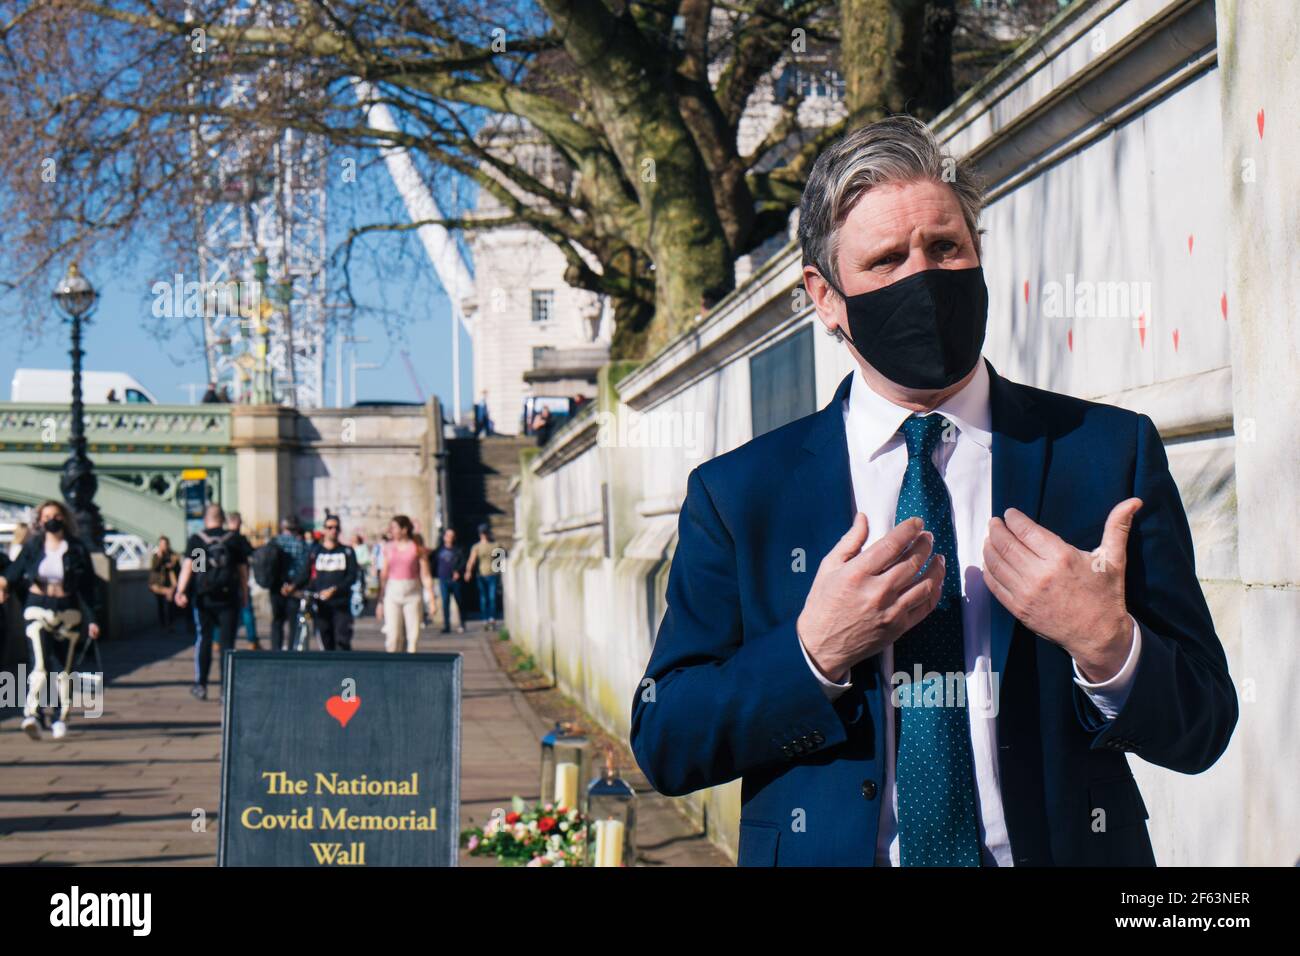 St Thomas's Hospital, London, UK. 29th March 2021. The bereaved and volunteers paint hearts for each person who has died of Covid. sir Keir Starmer, leader of the Labour Party pays a visit to the wall to see the work in progress and talk to the volunteers. Credit: Denise Laura Baker/Alamy Live News Stock Photo